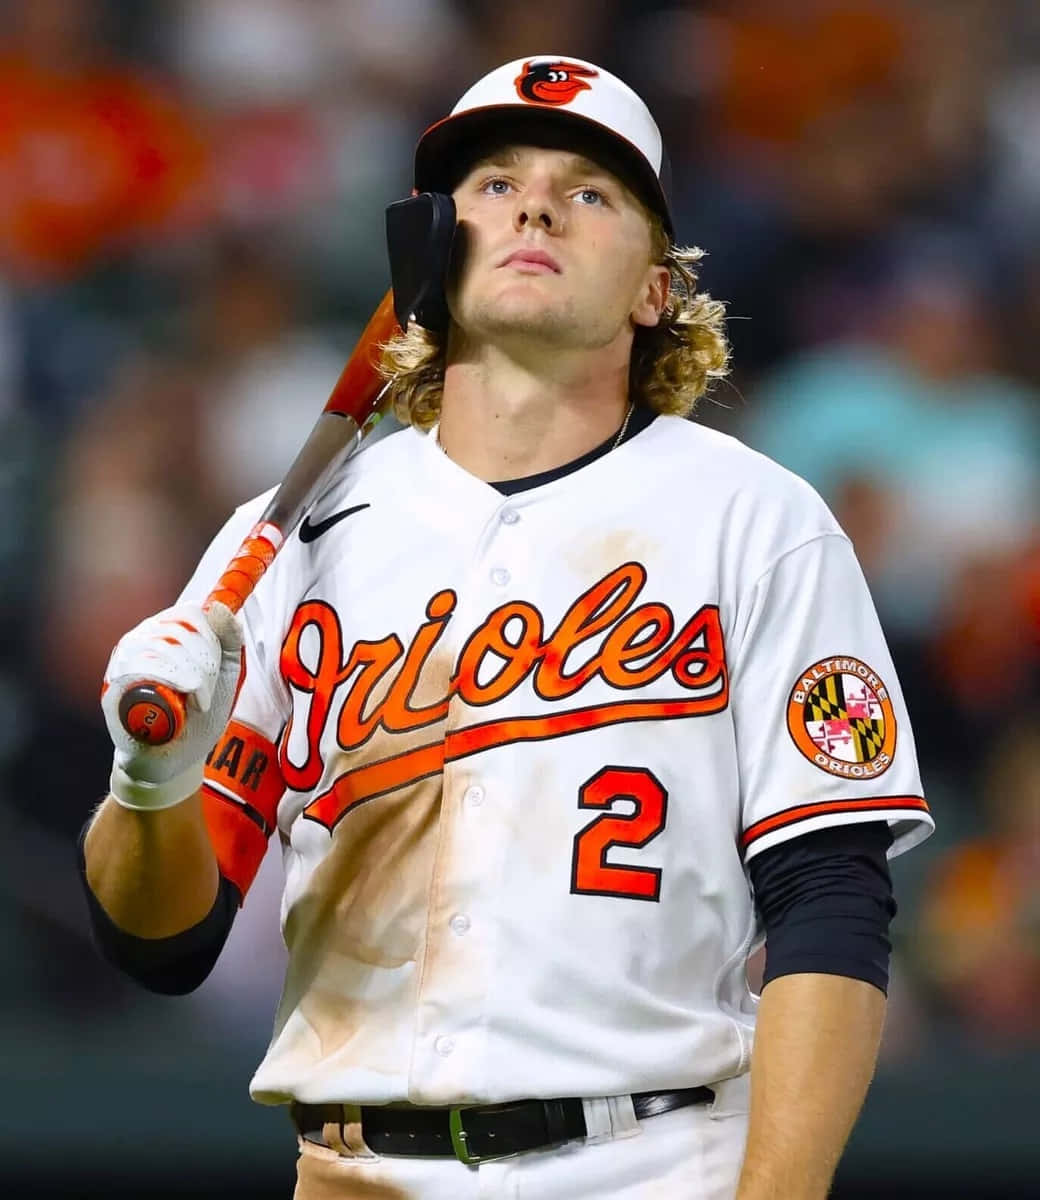 Orioles Player Concentration Wallpaper